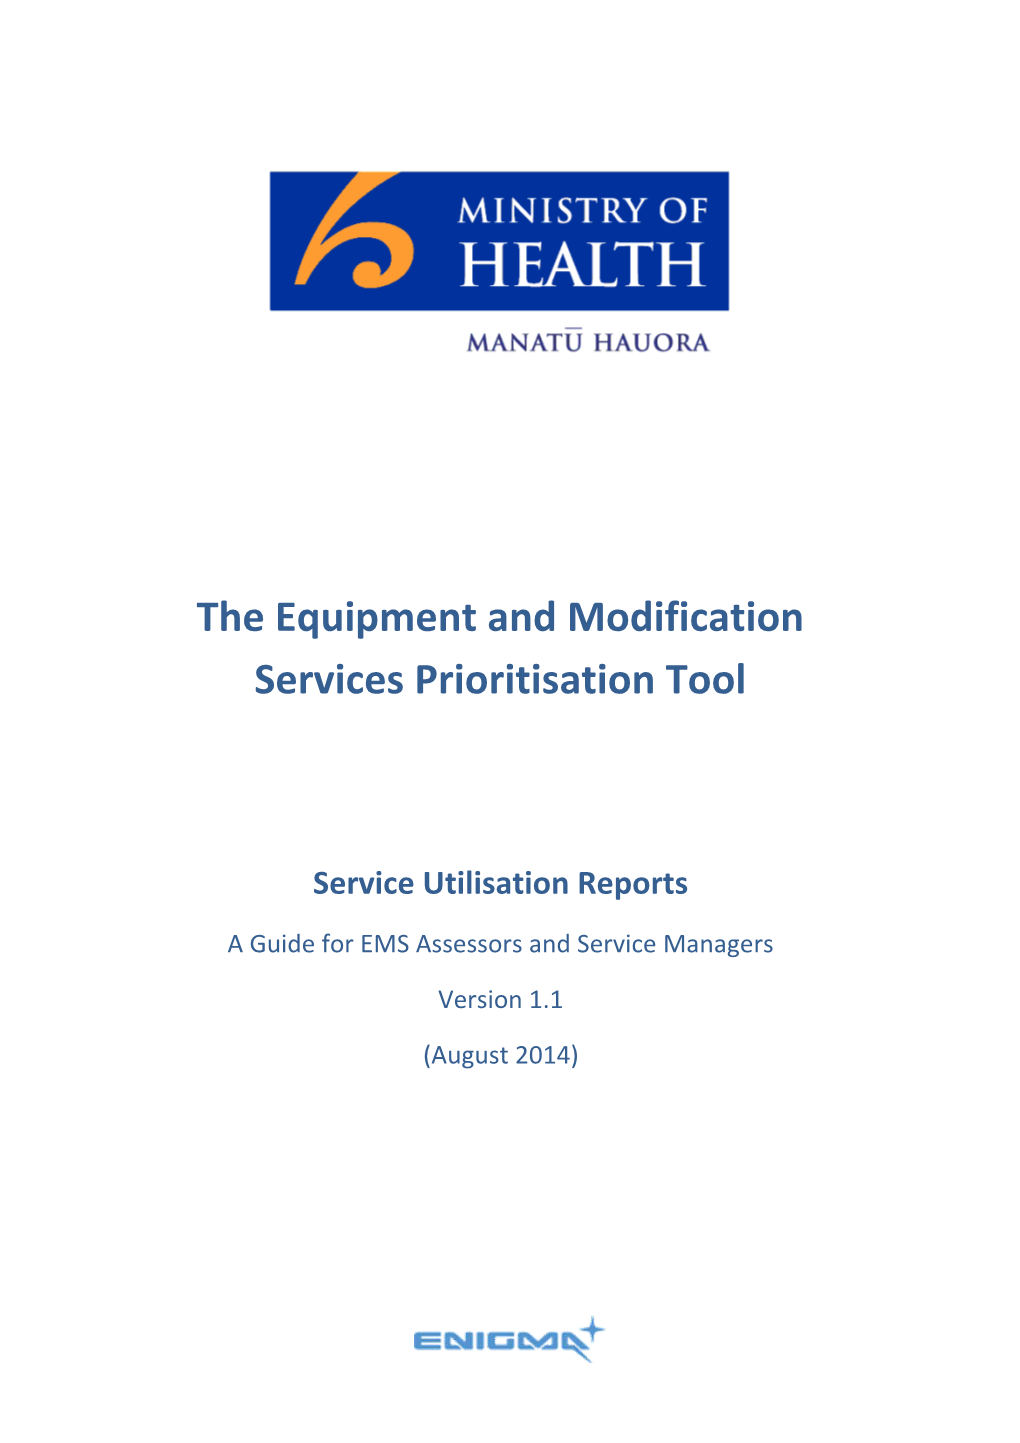 Service Utilisation Reports EMS Assessors / Service Managers